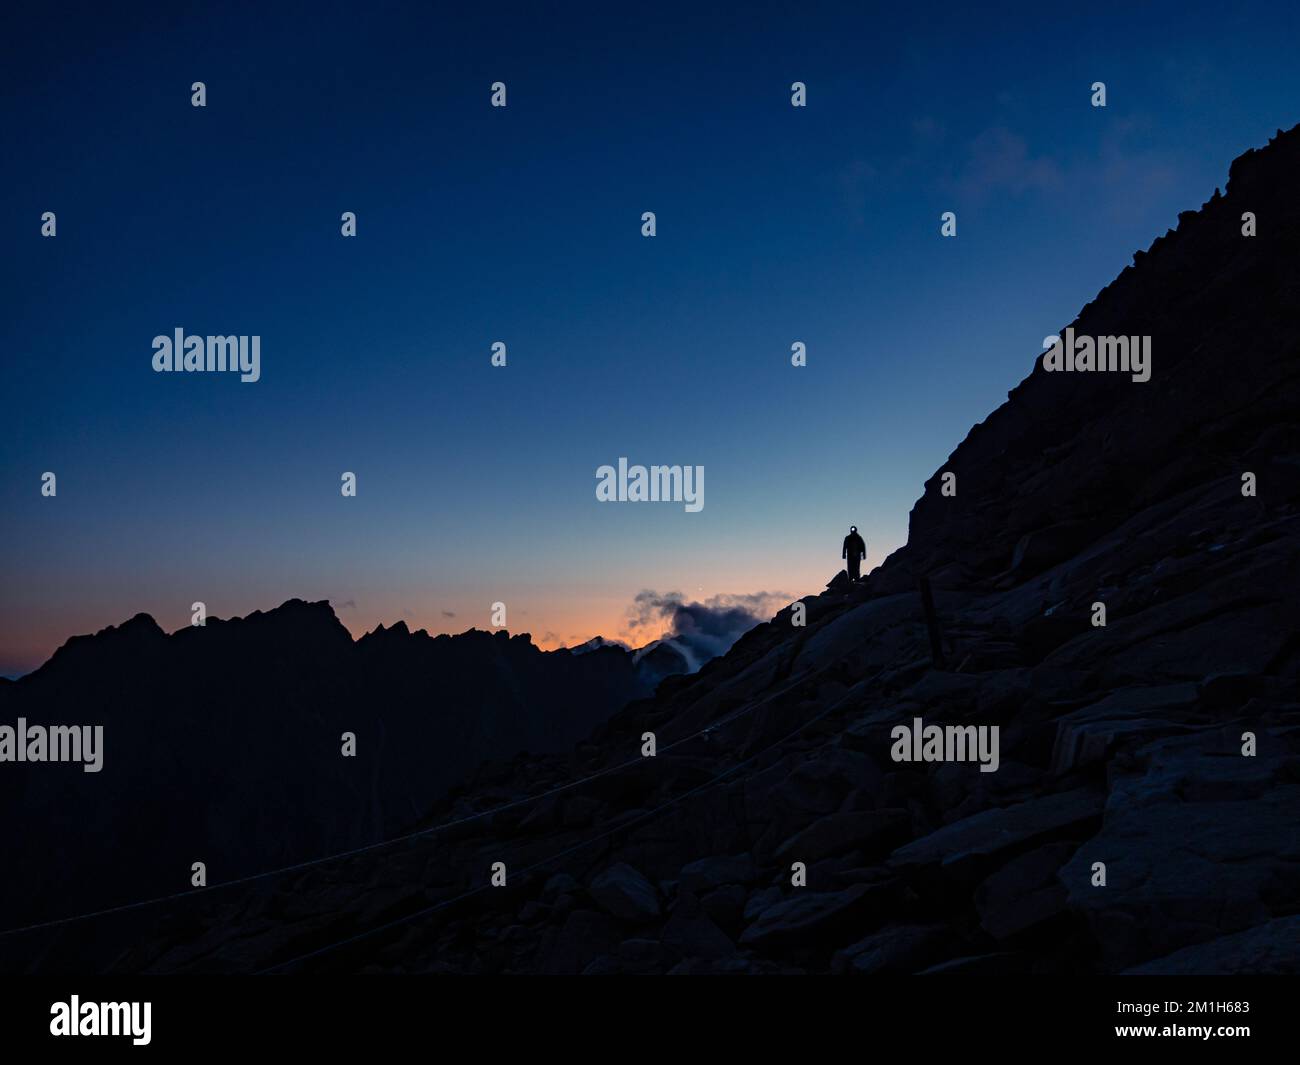 Silhouette of a mountaineer tourist with a headlamp on a ridge during colorful sunset, fearless determination courage, Tatra mountains Slovakia Vysoke Stock Photo